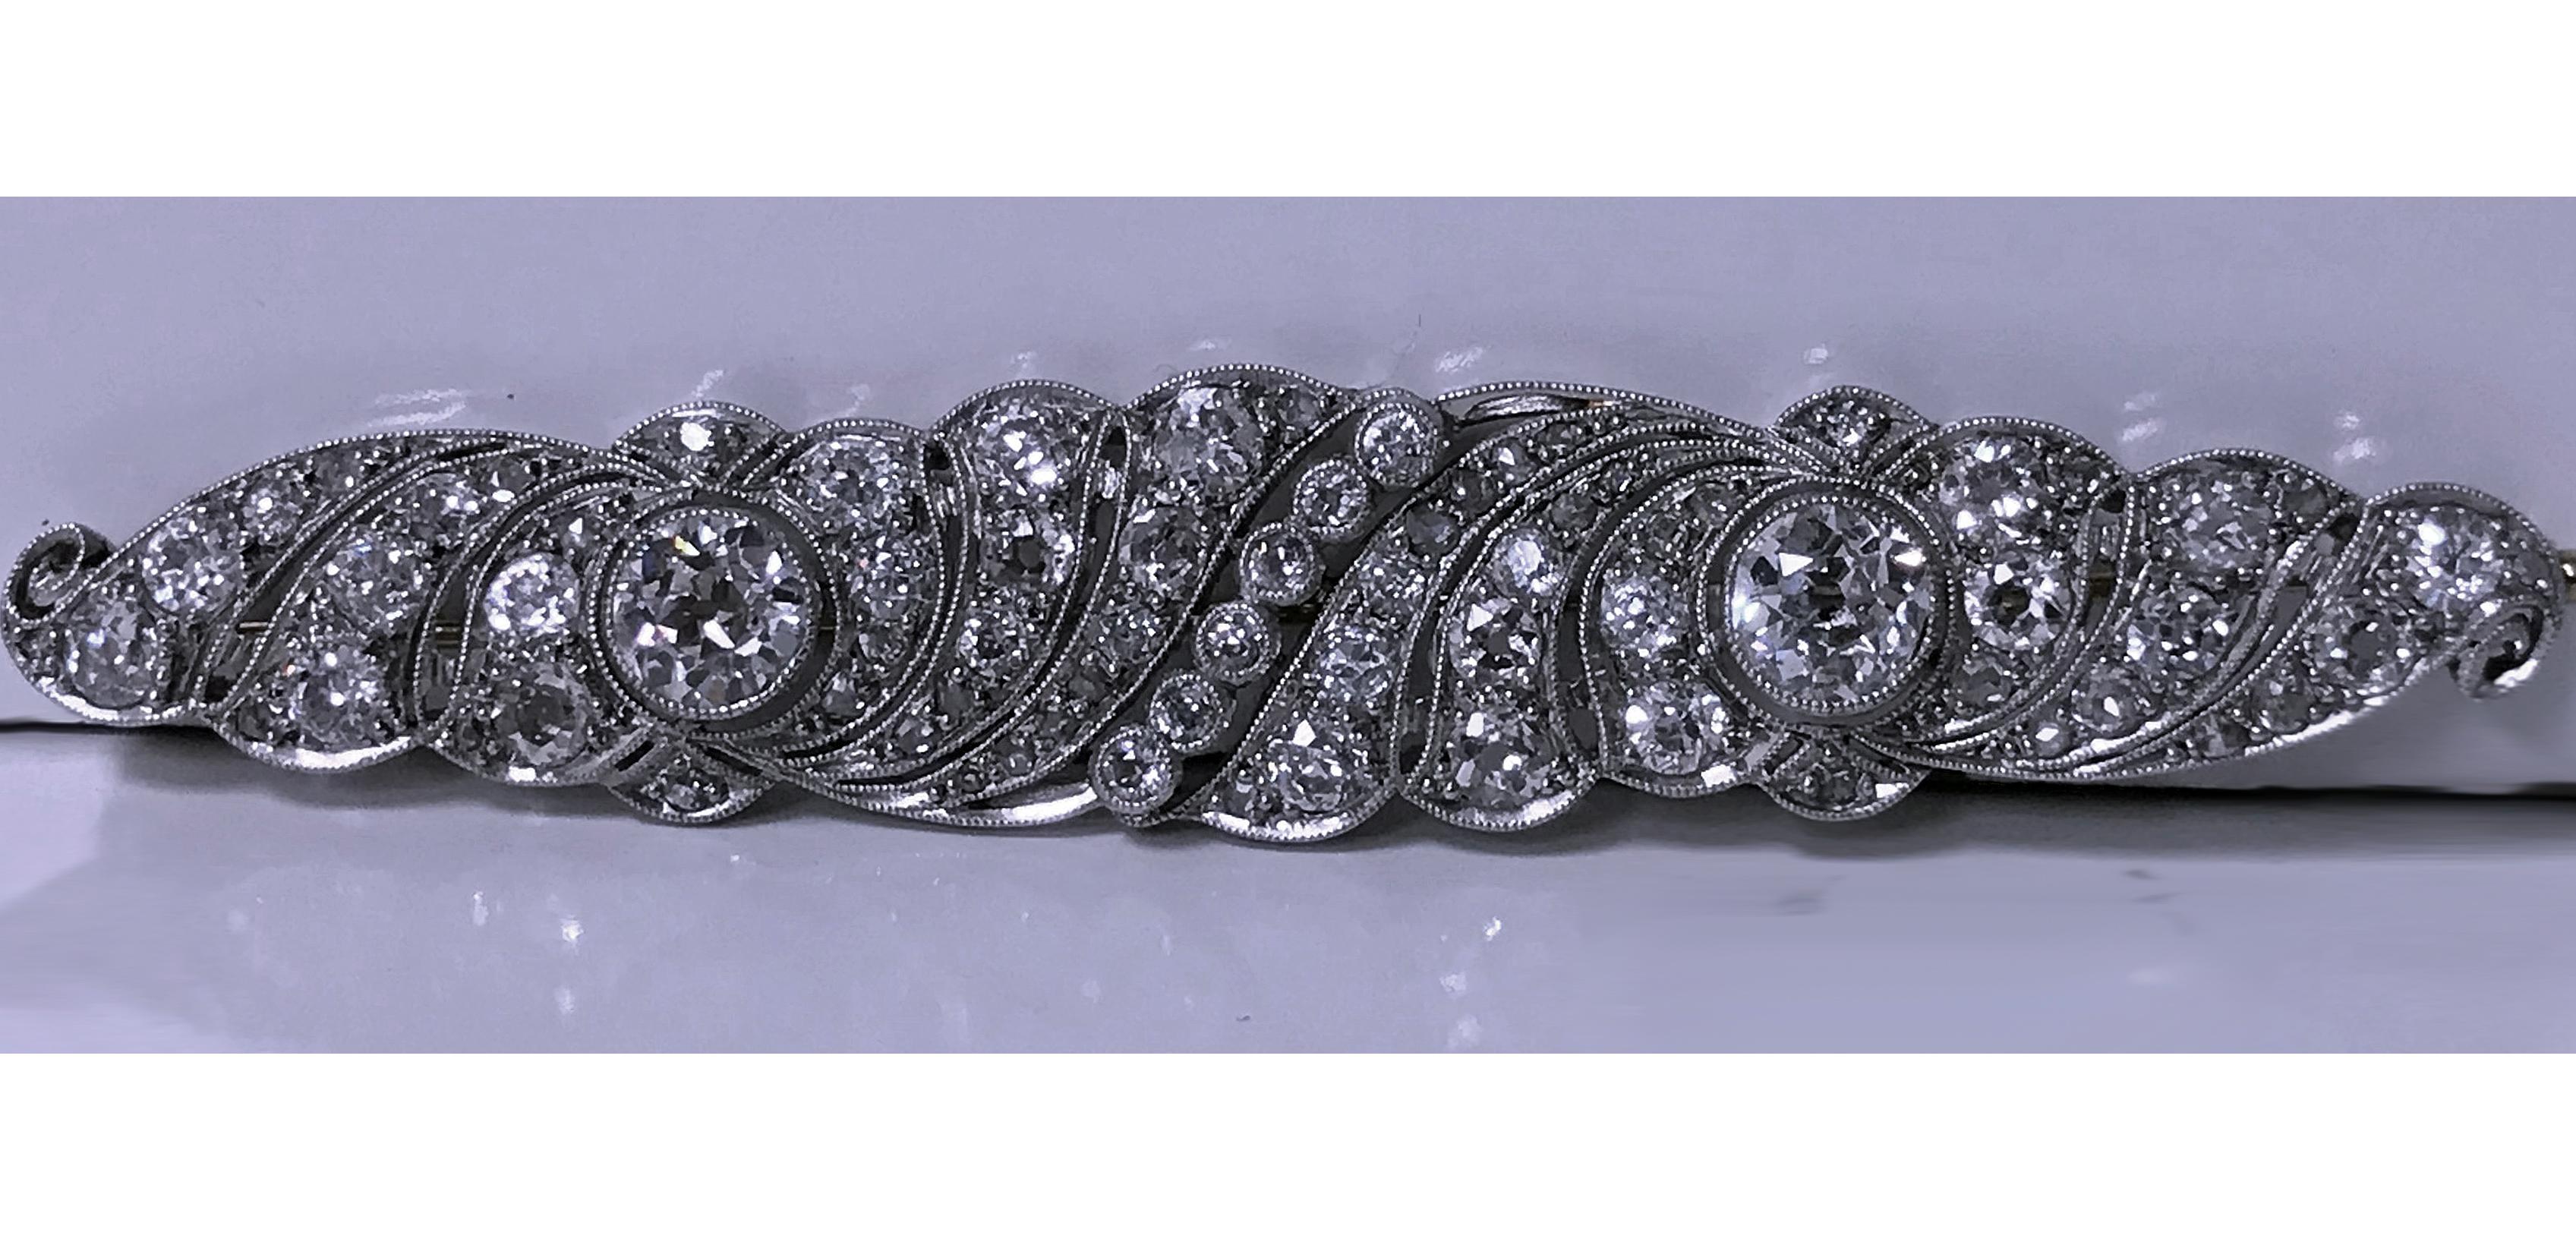 Art Deco Platinum Diamond bar Brooch, C.1920. The brooch bezel milligrain diamond set with two old european cut diamonds, diamond weight approximately 0.97ct and 0.87 ct respectively, with pierced swirl milligrain set surround of 72 mixed old cut